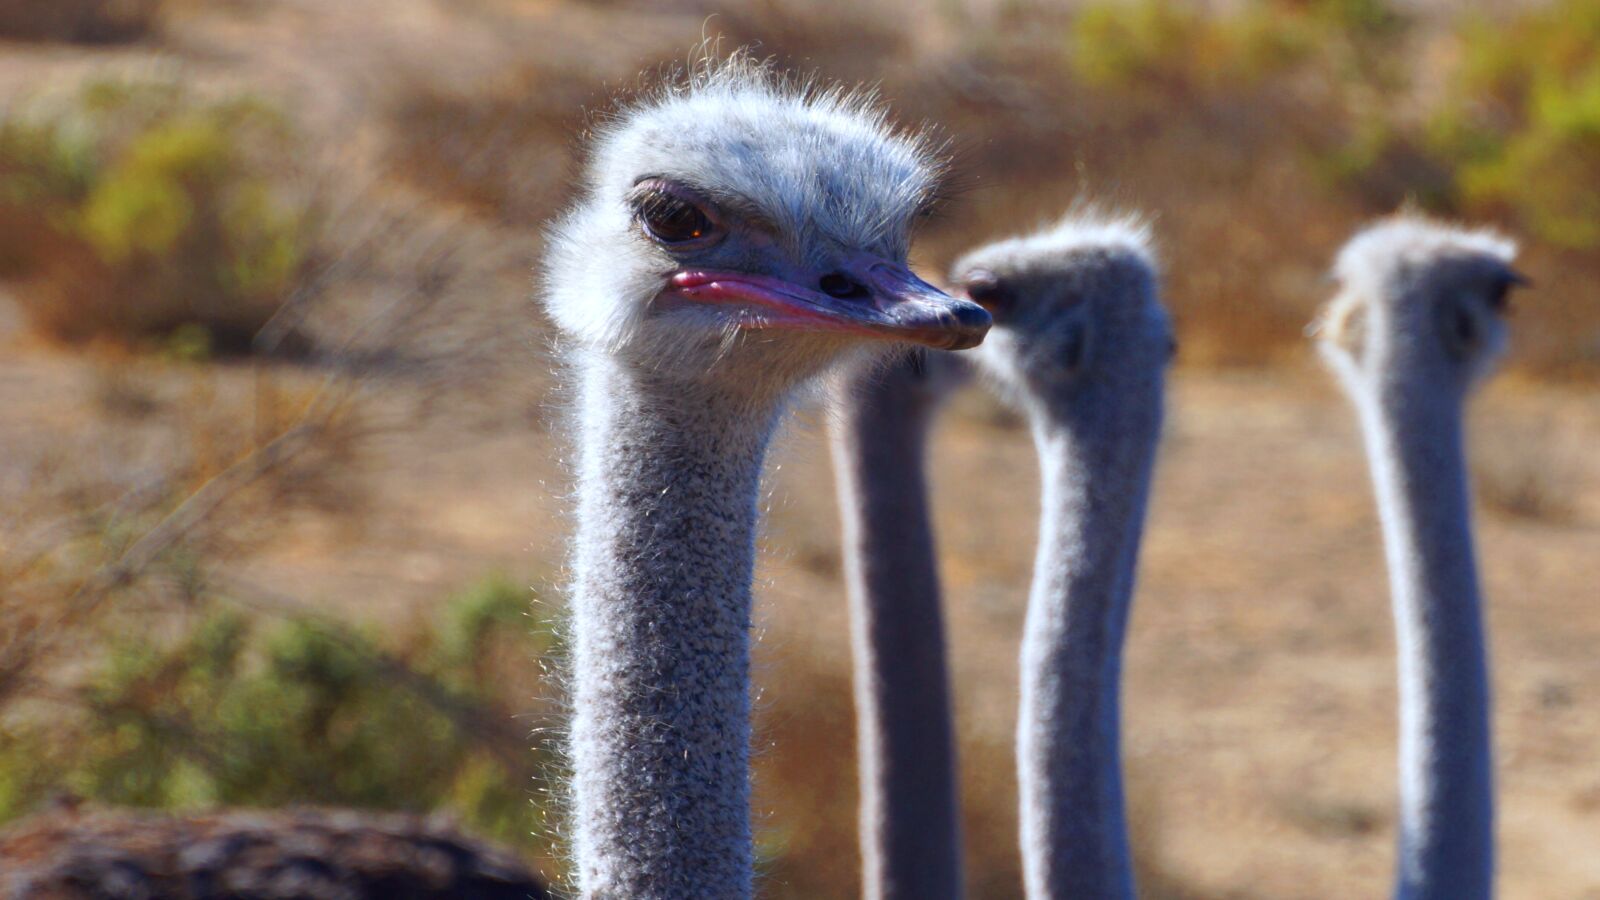 DT 18-270mm F3.5-6.3 sample photo. Ostrich, animal, nature photography